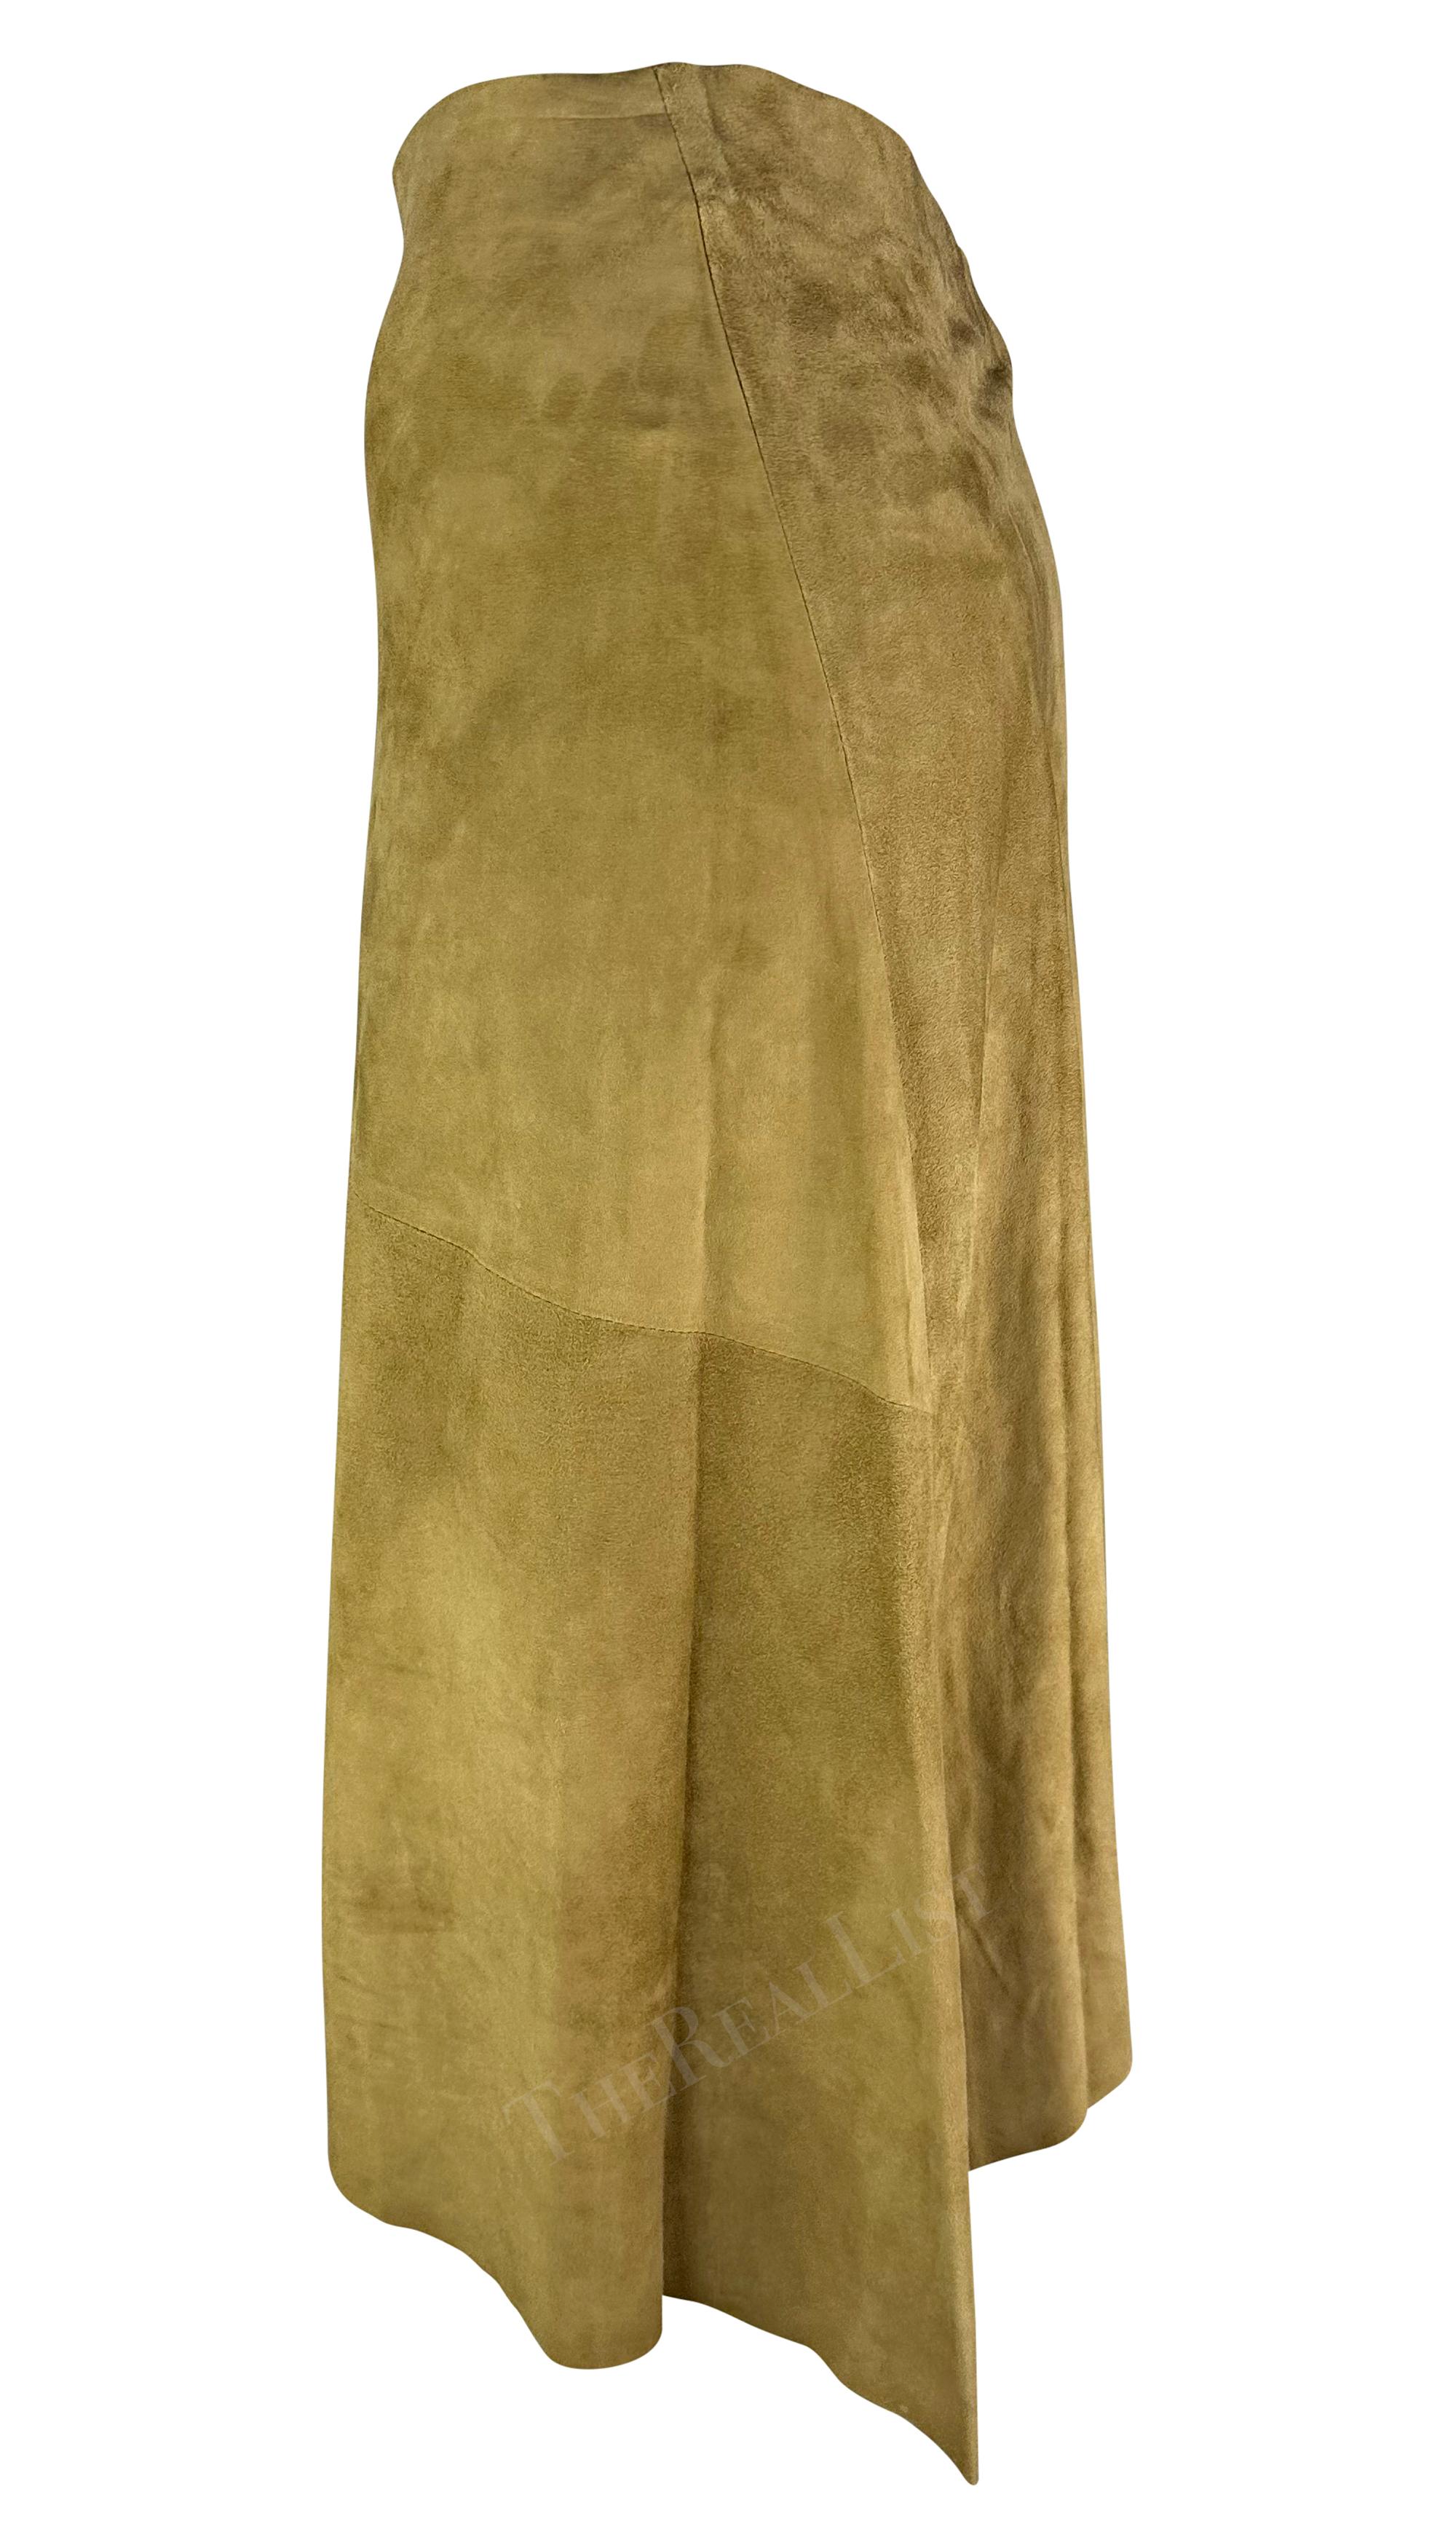 S/S 2002 Gucci by Tom Ford Tan Suede Floral Cutout Flare Wrap Skirt For Sale 2